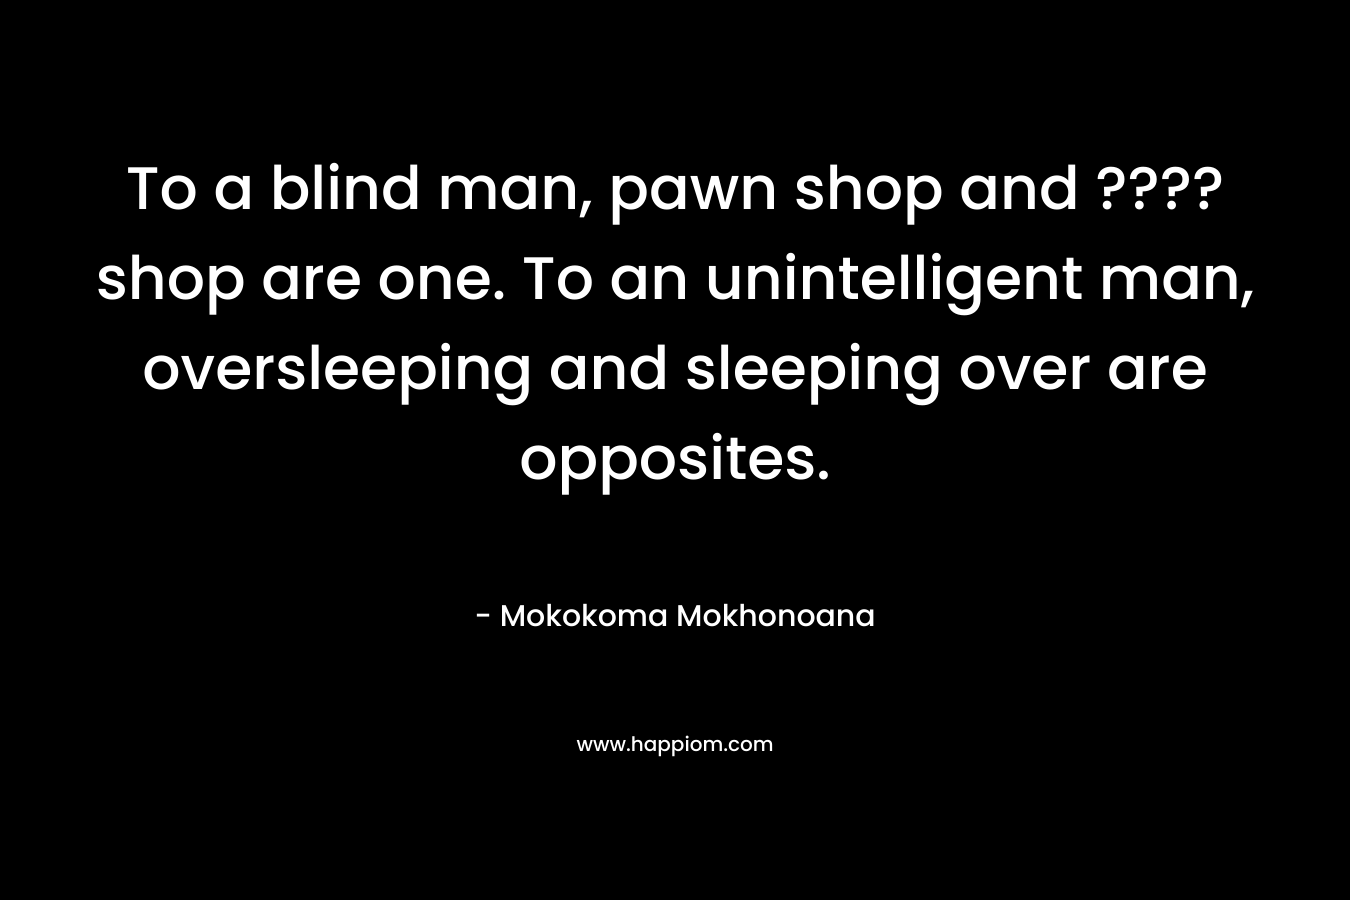 To a blind man, pawn shop and ???? shop are one. To an unintelligent man, oversleeping and sleeping over are opposites.